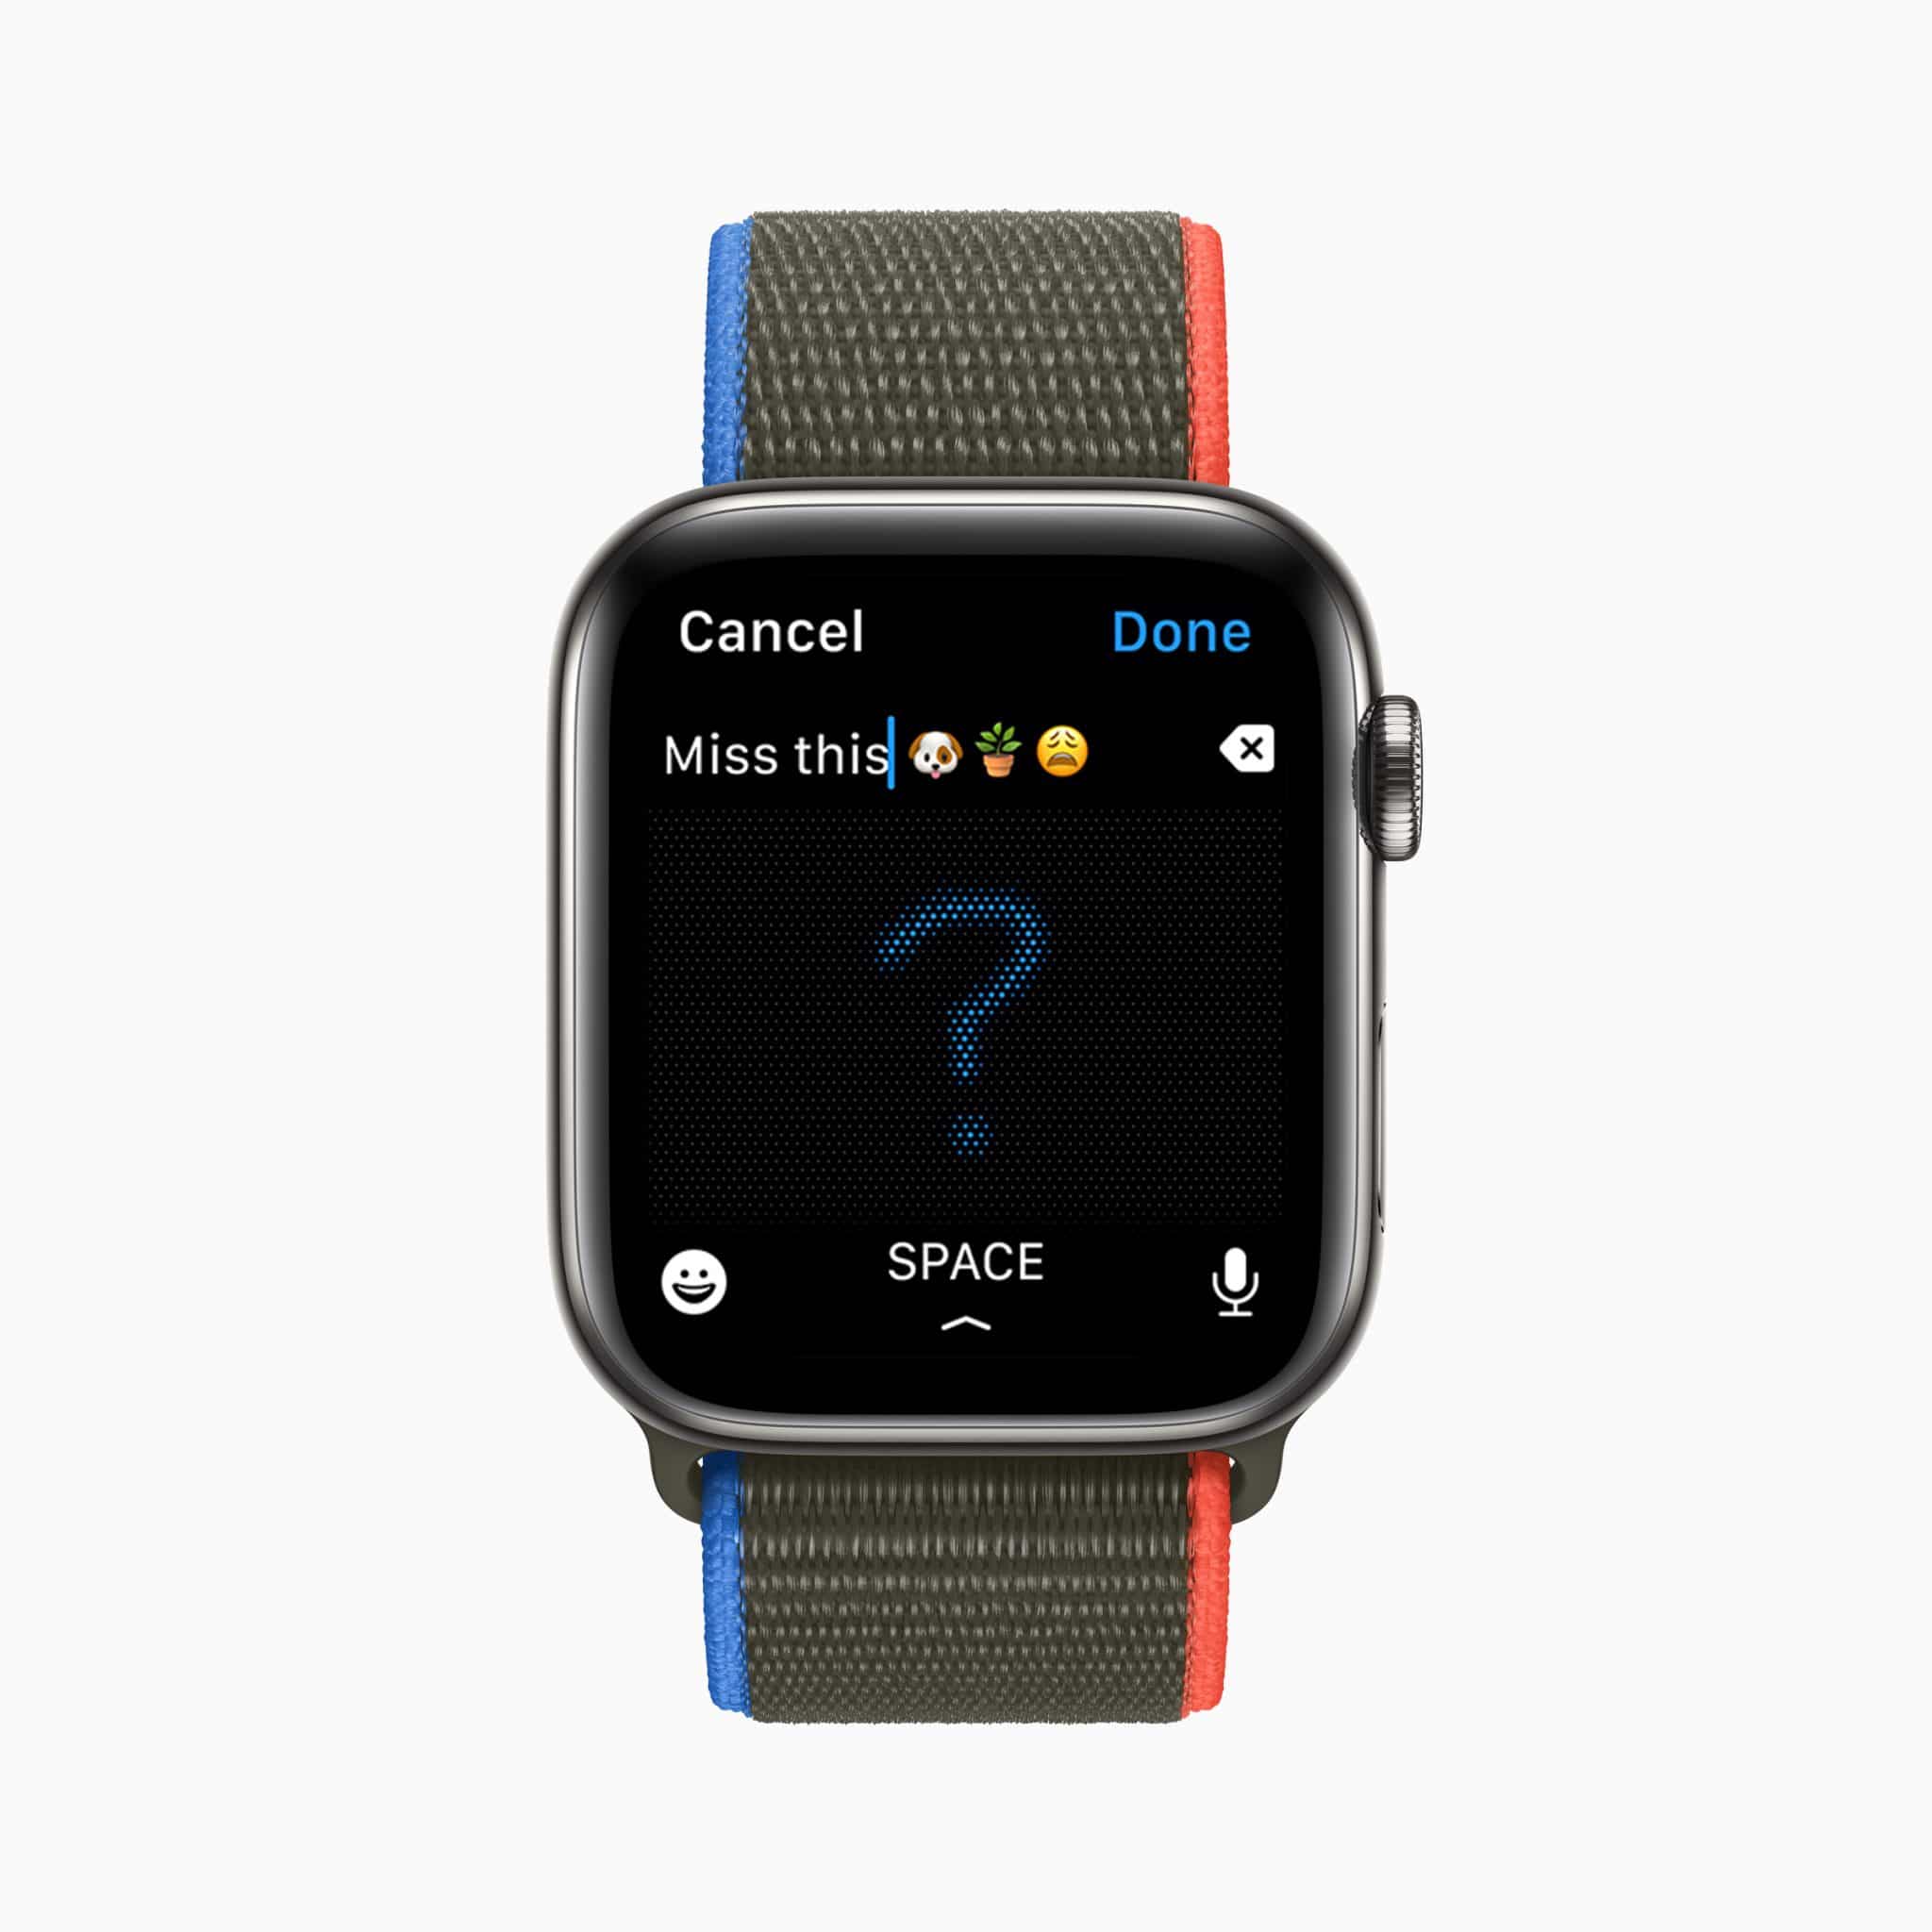 new messages on Apple Watch